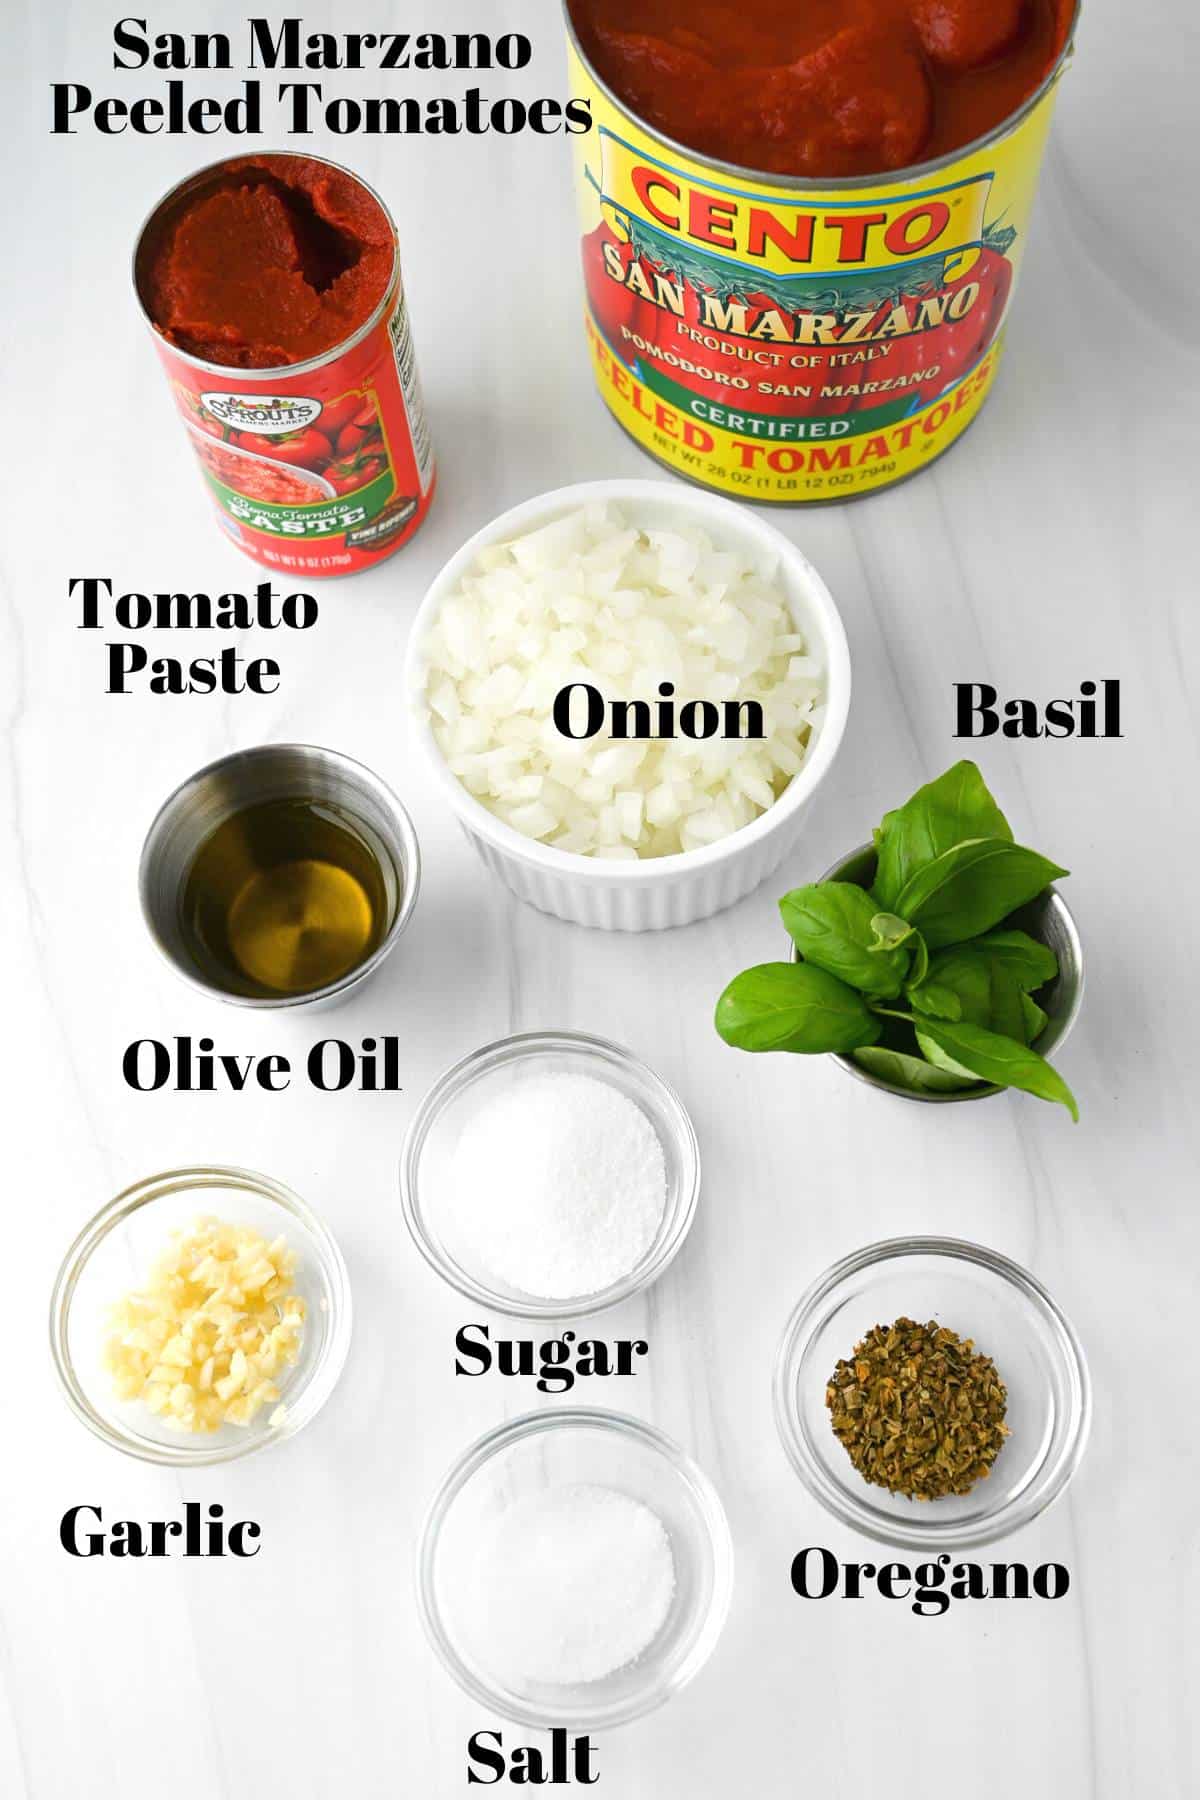 ingredients for san marzano pizza sauce measured out on a white counter